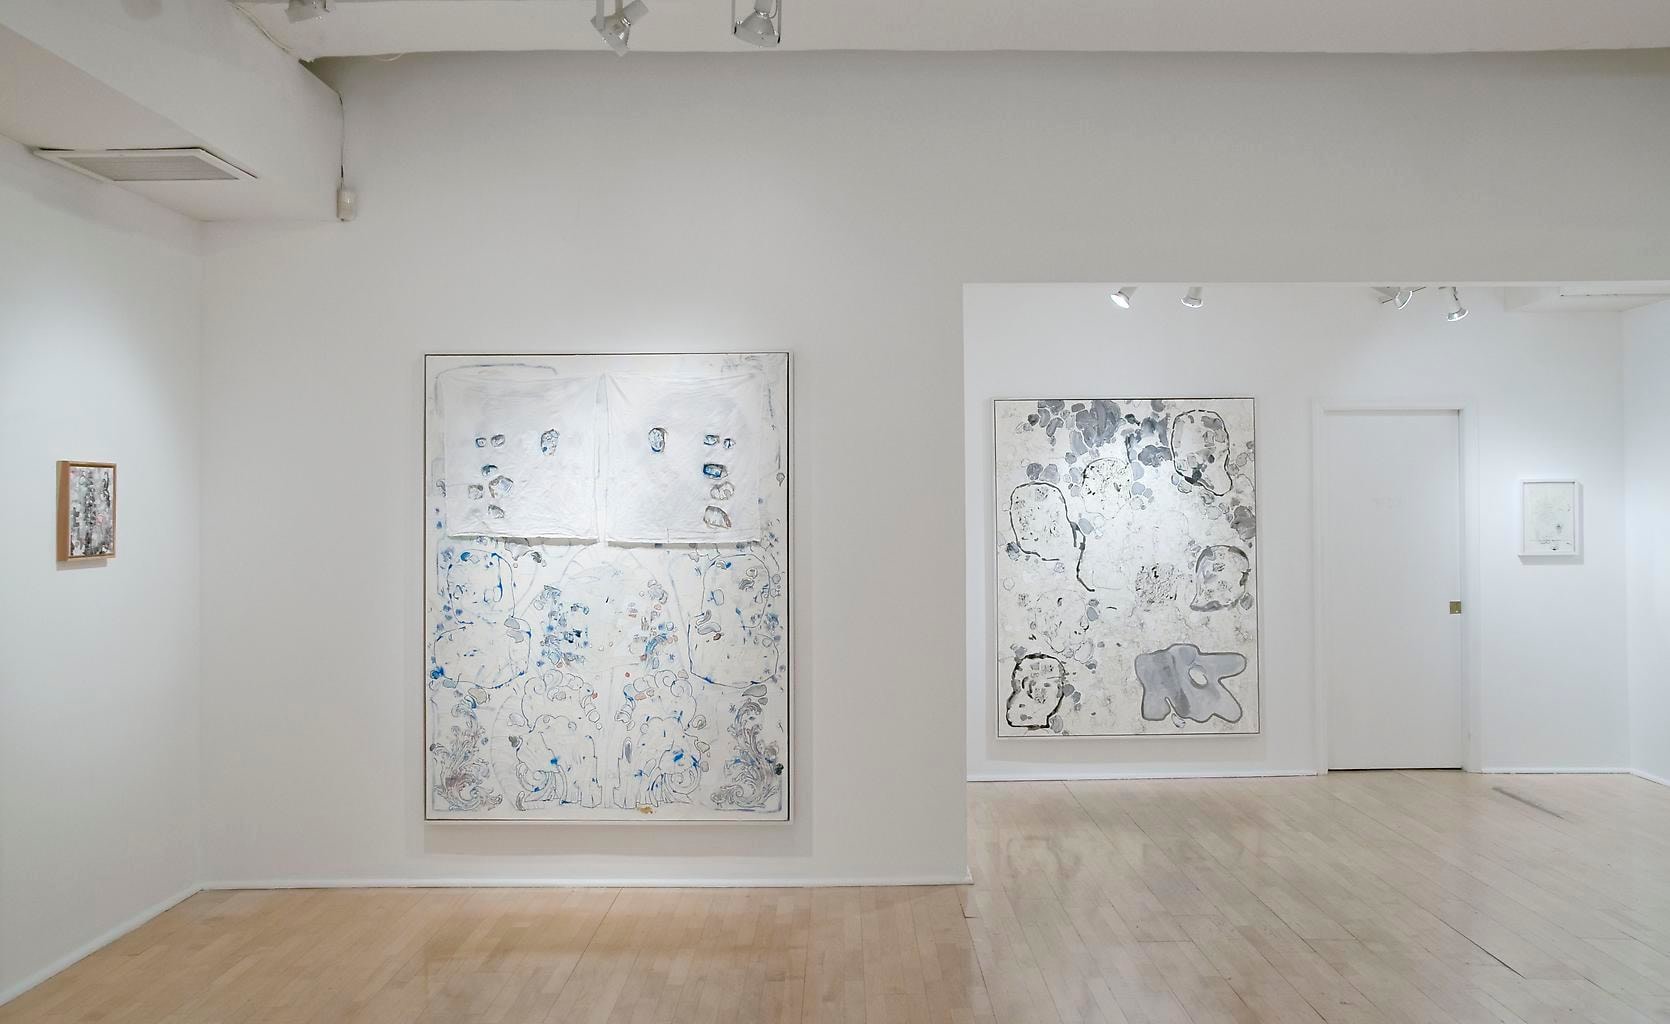  Installation view, Carter, Some Feelings, 1984, 1970, Marc Jancou, New York, May 11 - June 29, 2013